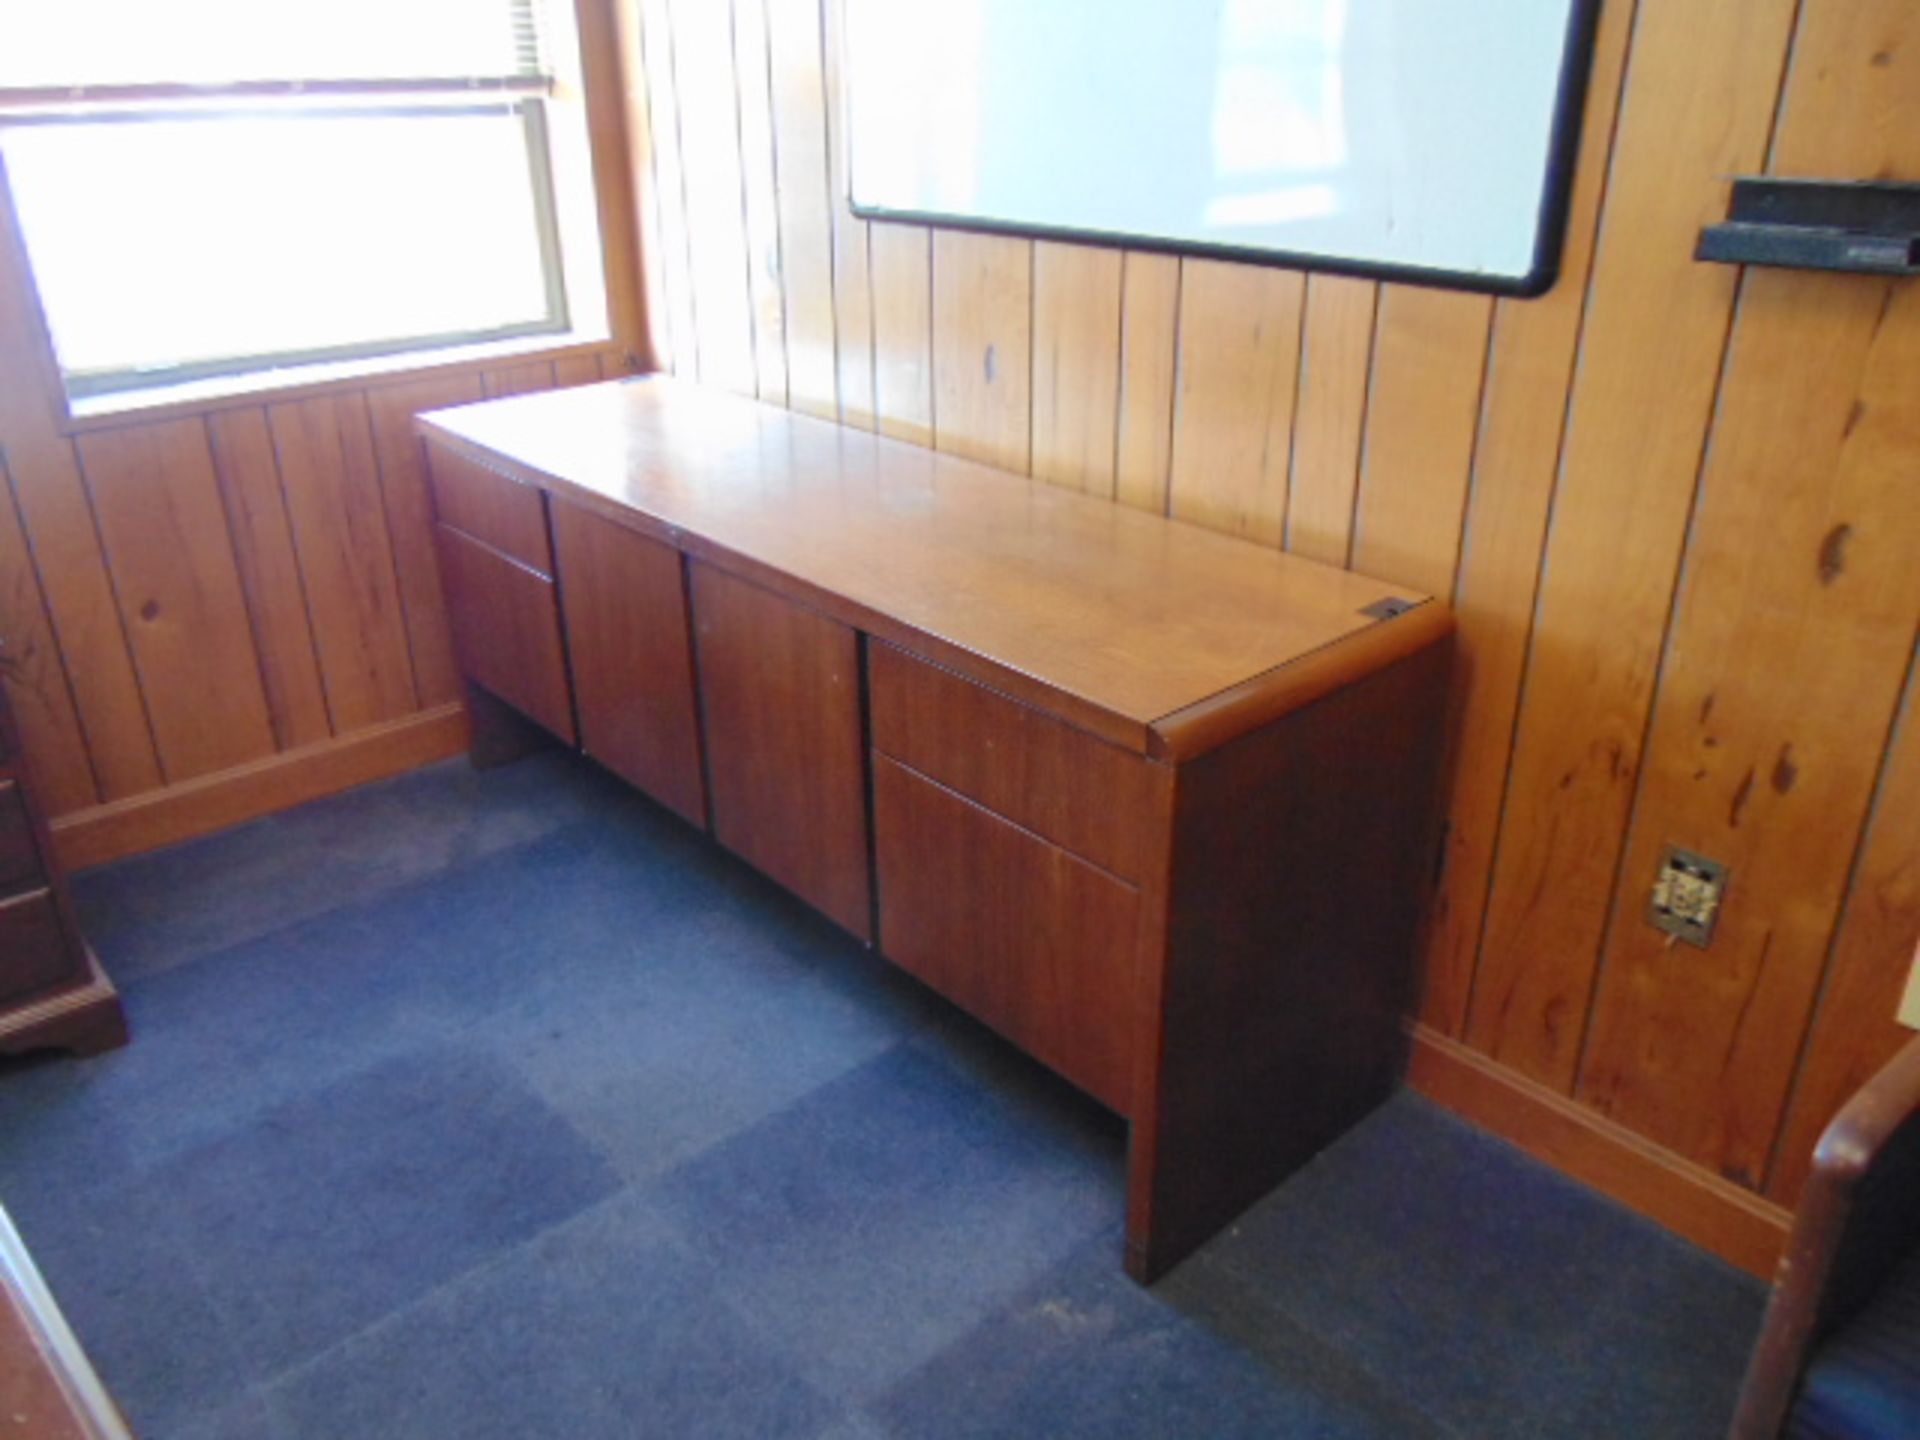 LOT CONSISTING OF: (2) desks, credenza, bookcase & (3) chairs (located upstairs) - Image 2 of 3